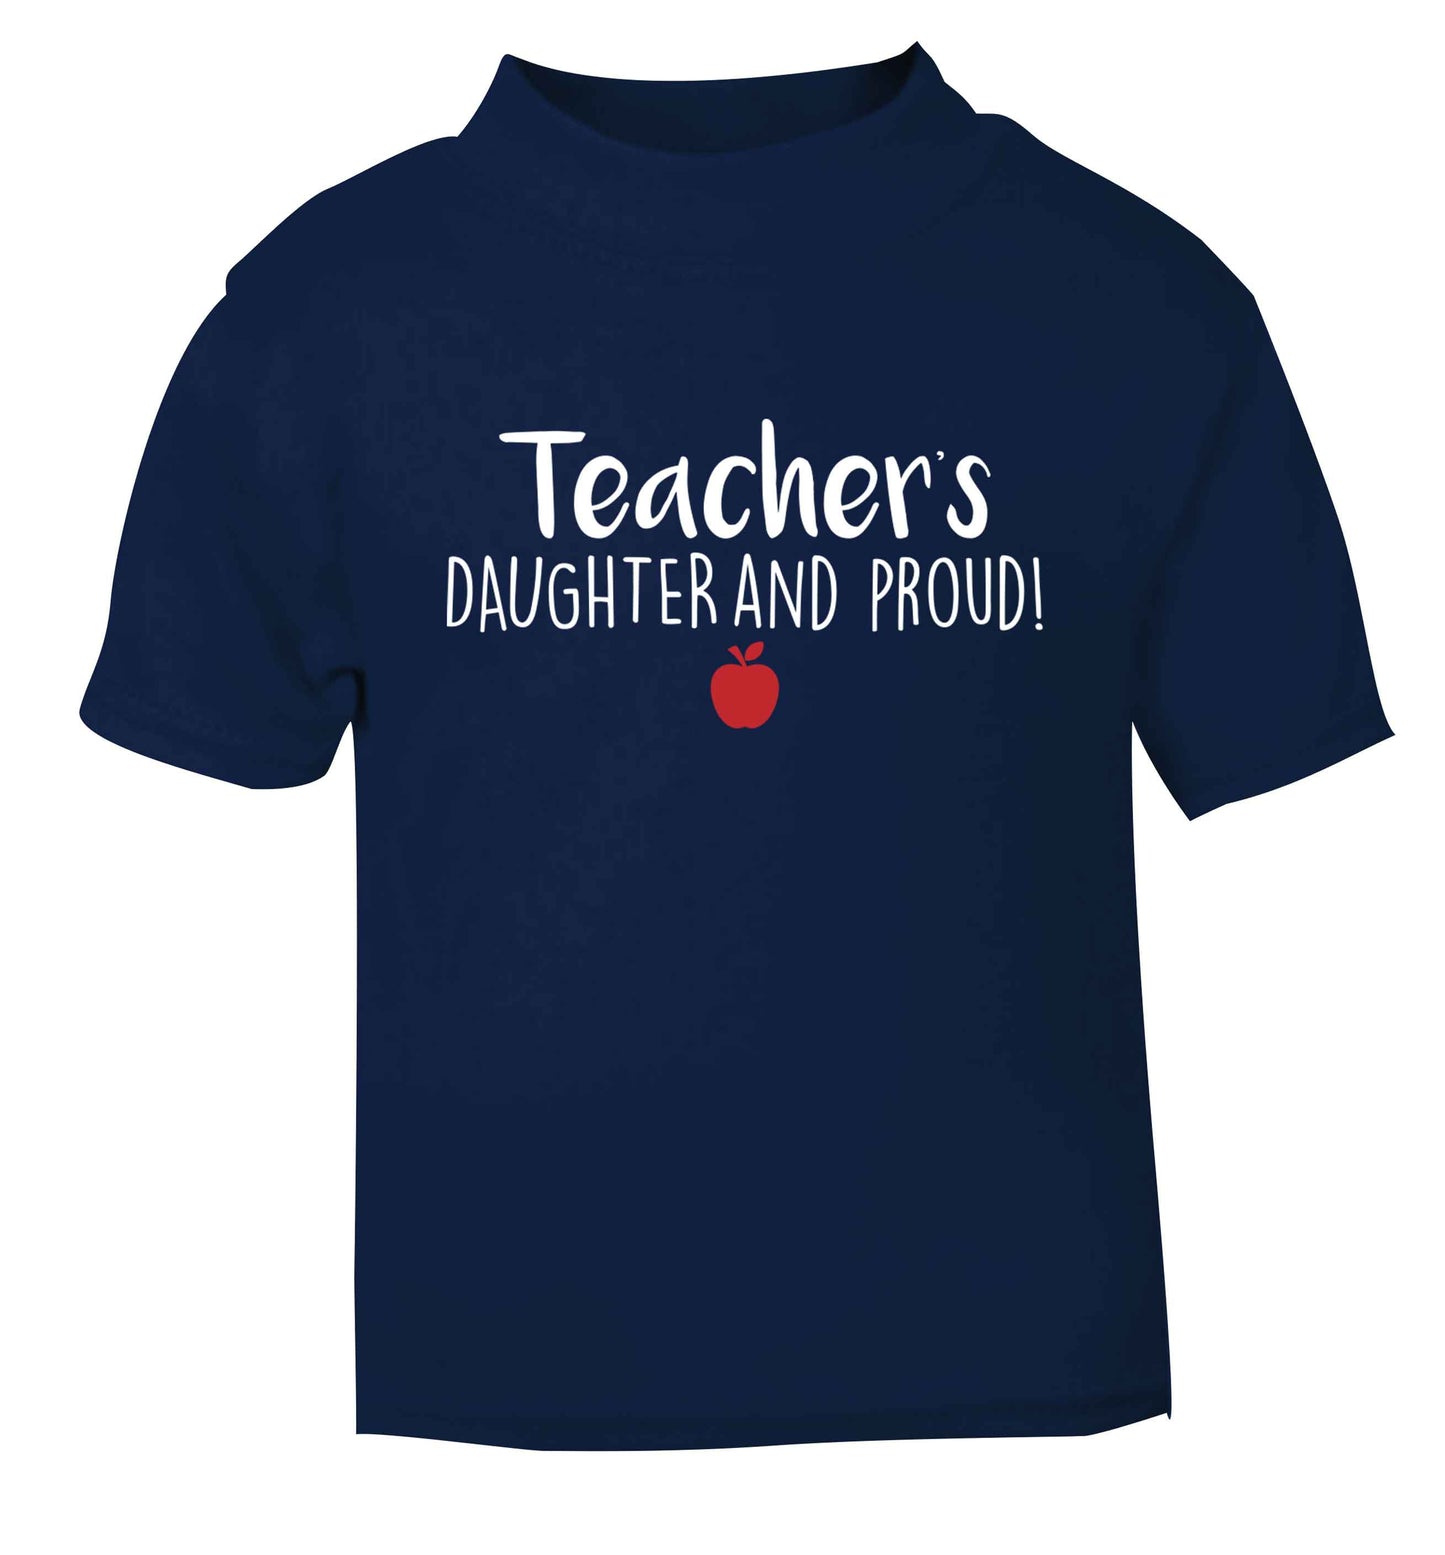 Teachers daughter and proud navy baby toddler Tshirt 2 Years